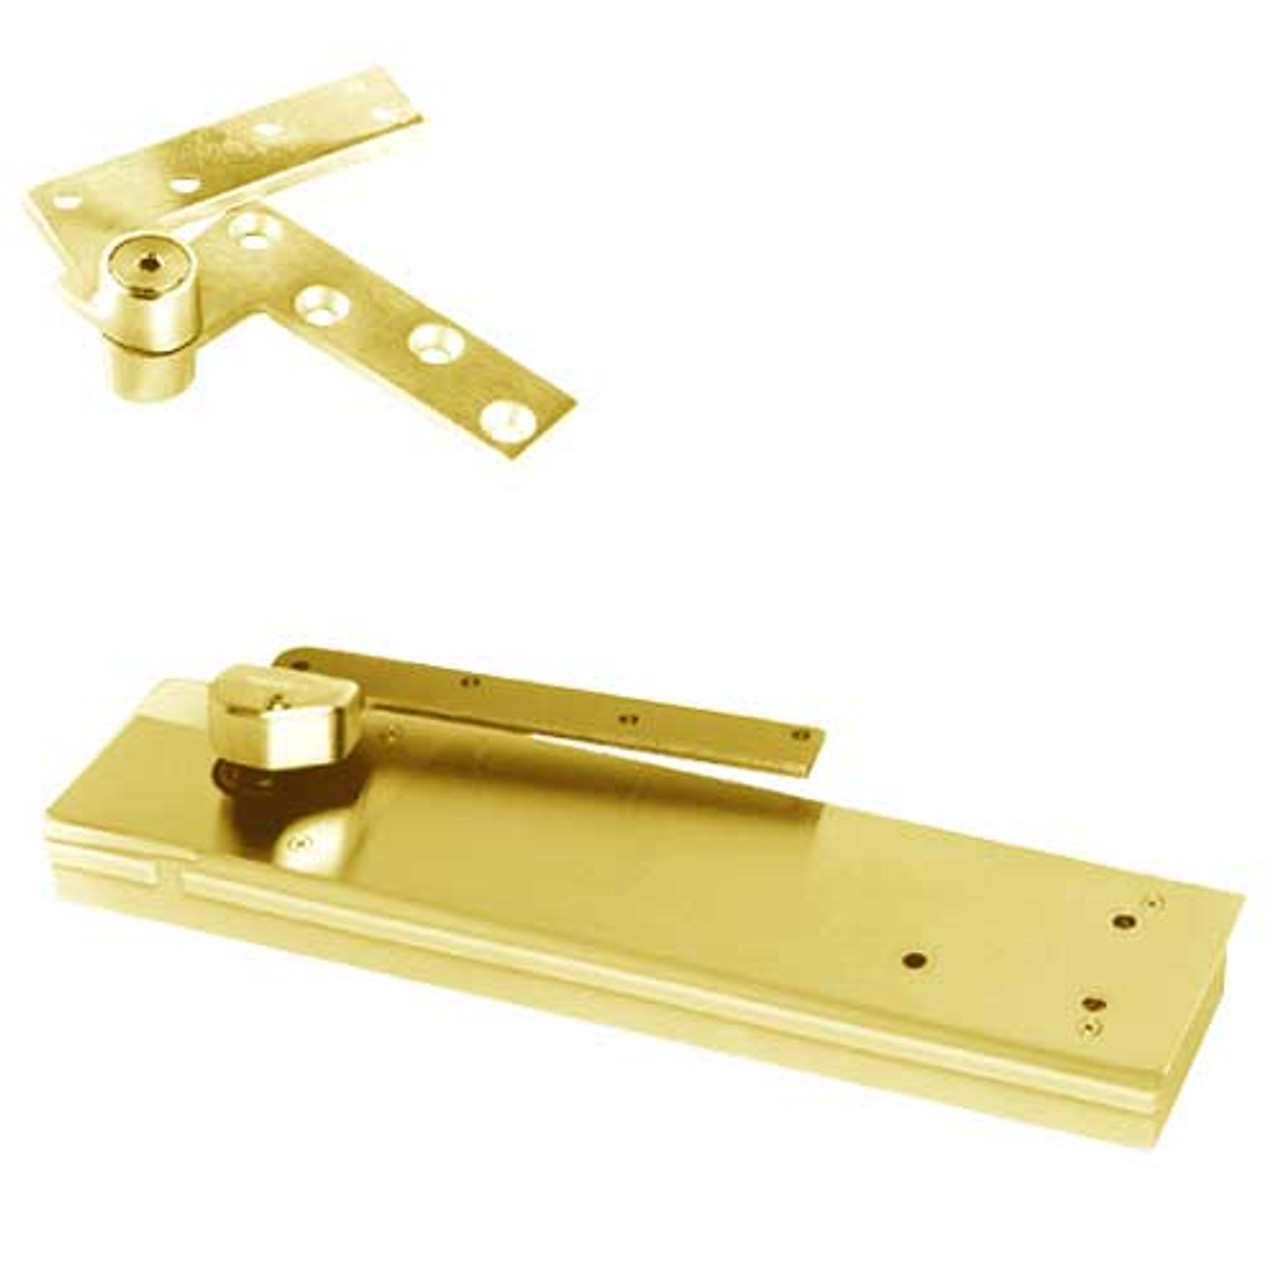 5105ABC105-1-1/2OS-LH-605 Rixson 51 Series 1-1/2" Offset Hung Shallow Depth Floor Closers in Bright Brass Finish